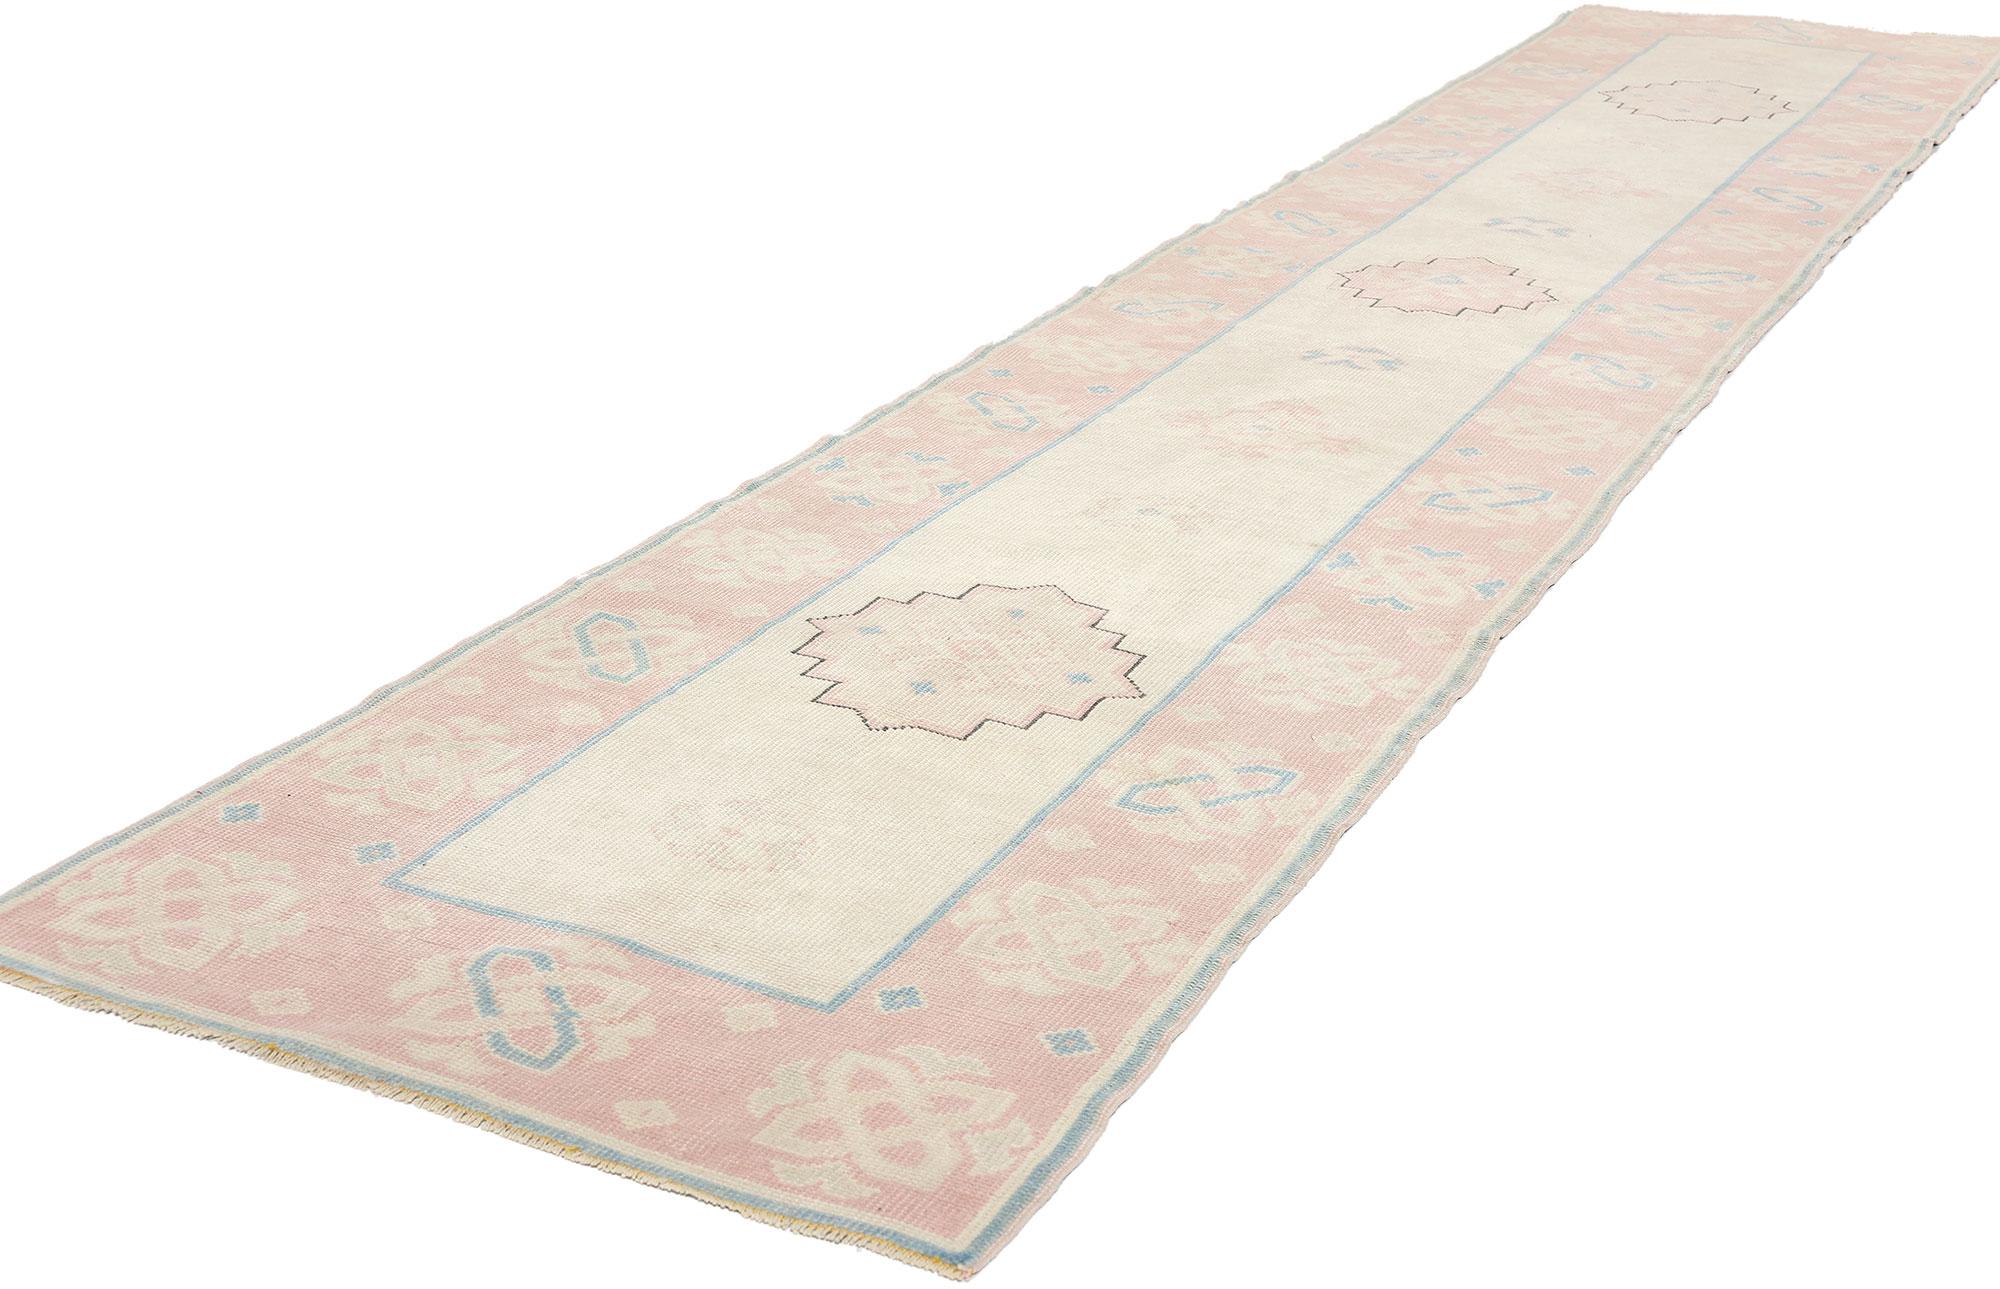 53942 Vintage Pink Persian Hamadan Rug Runner, 02'04 x 12'02. Persian Hamadan carpet runners are narrow and elongated rugs originating from the Hamadan region of Iran. These handwoven runners are meticulously crafted using traditional techniques and